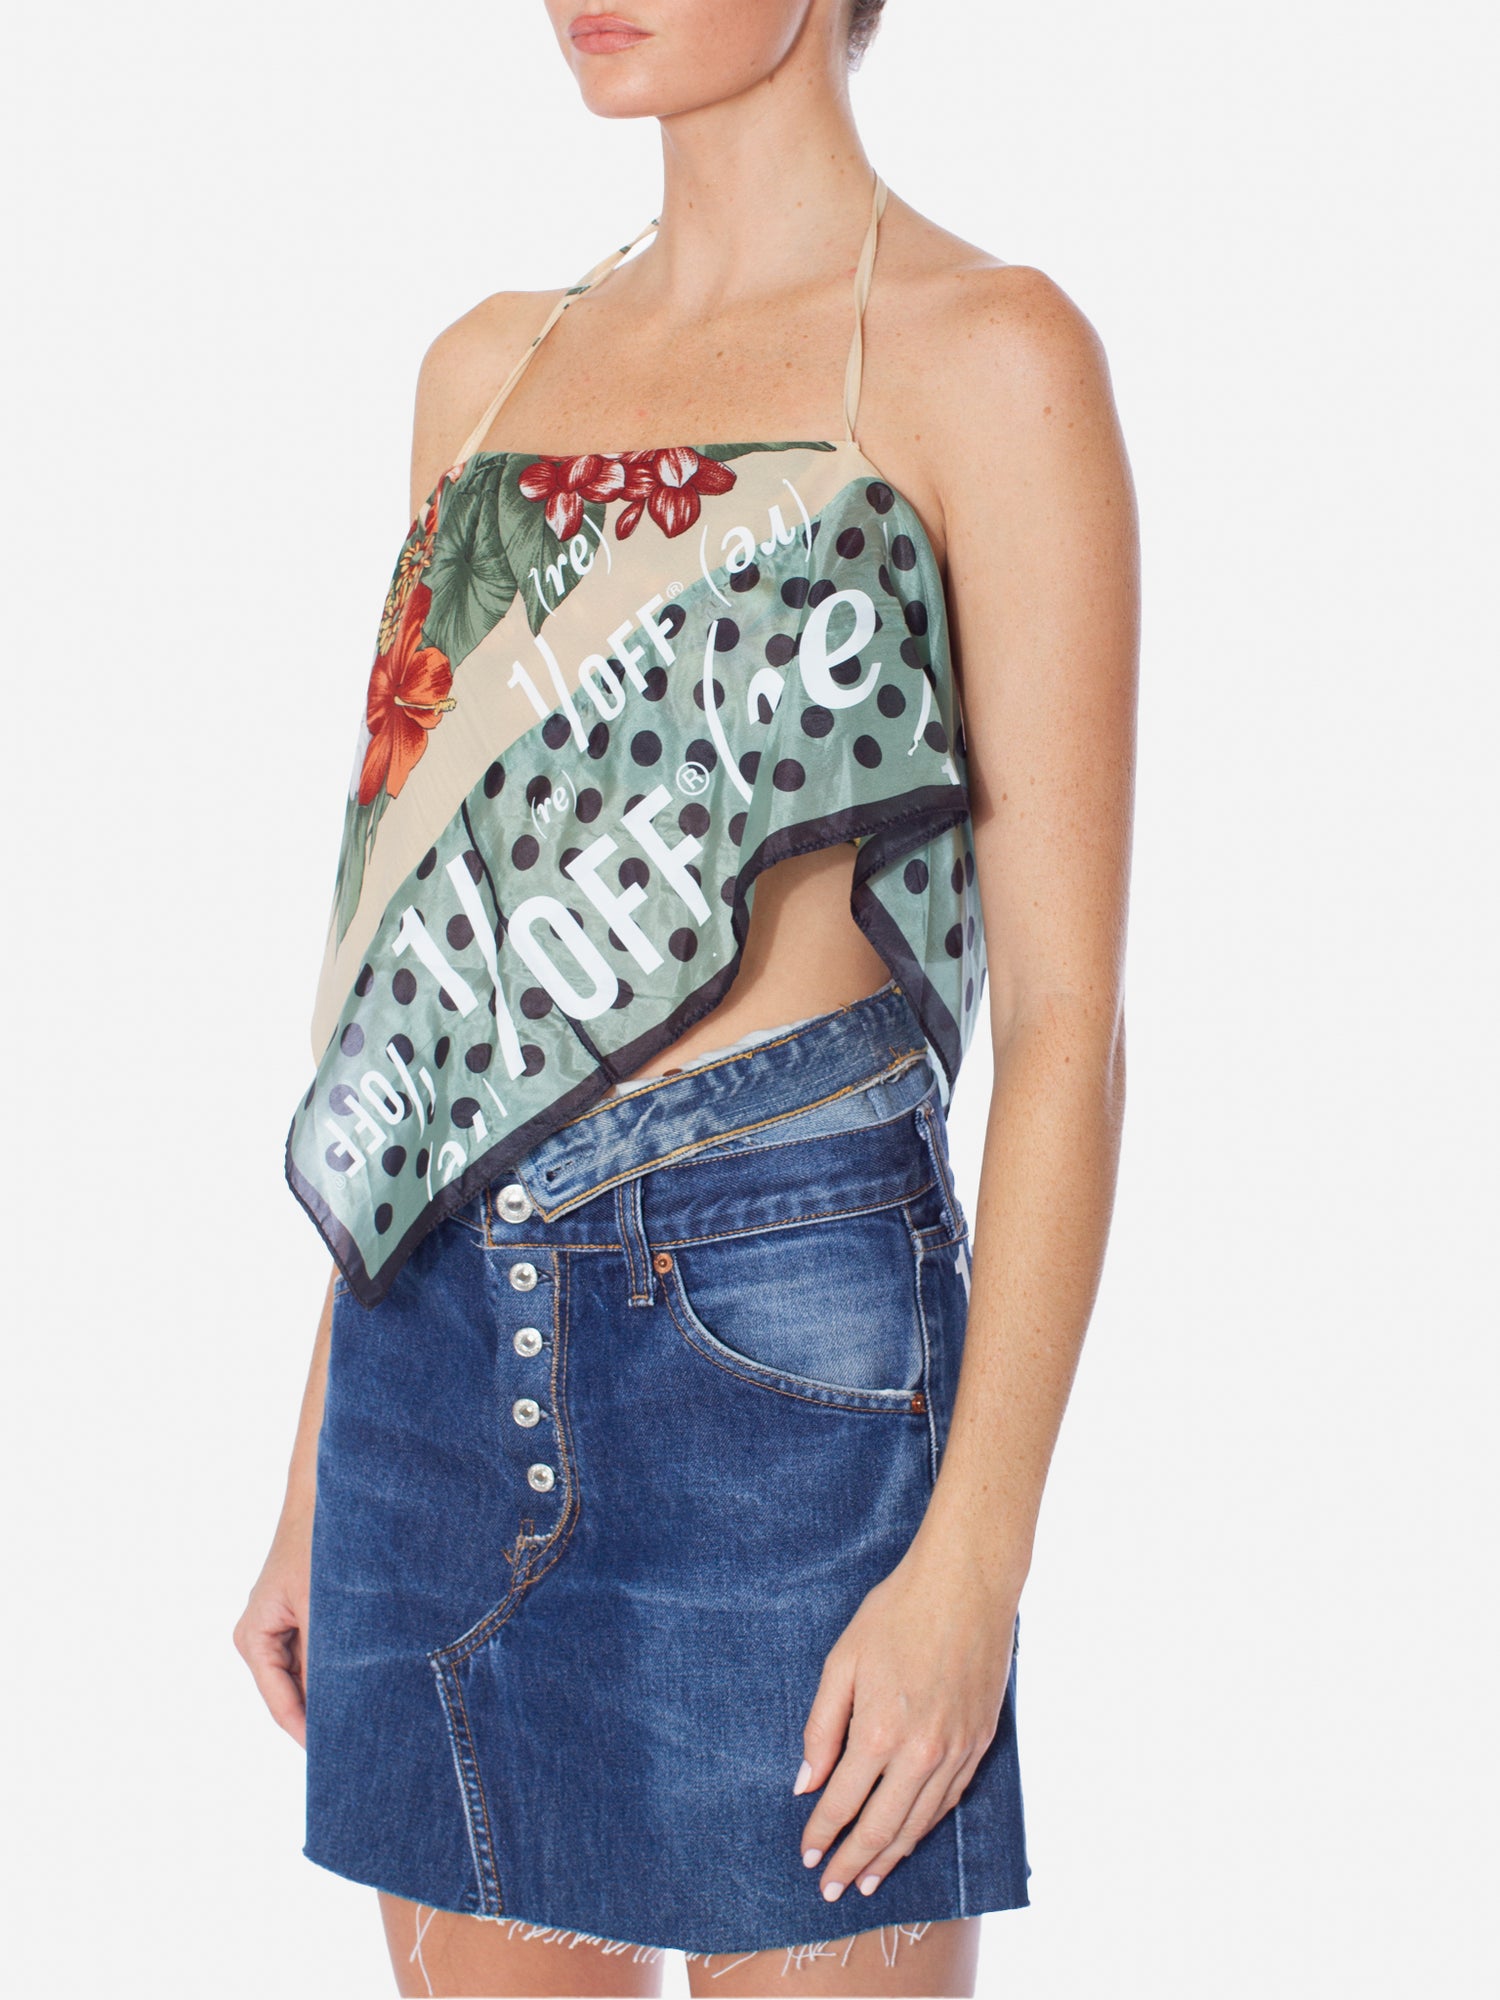 1/OFF PARIS Top Scarf Backless